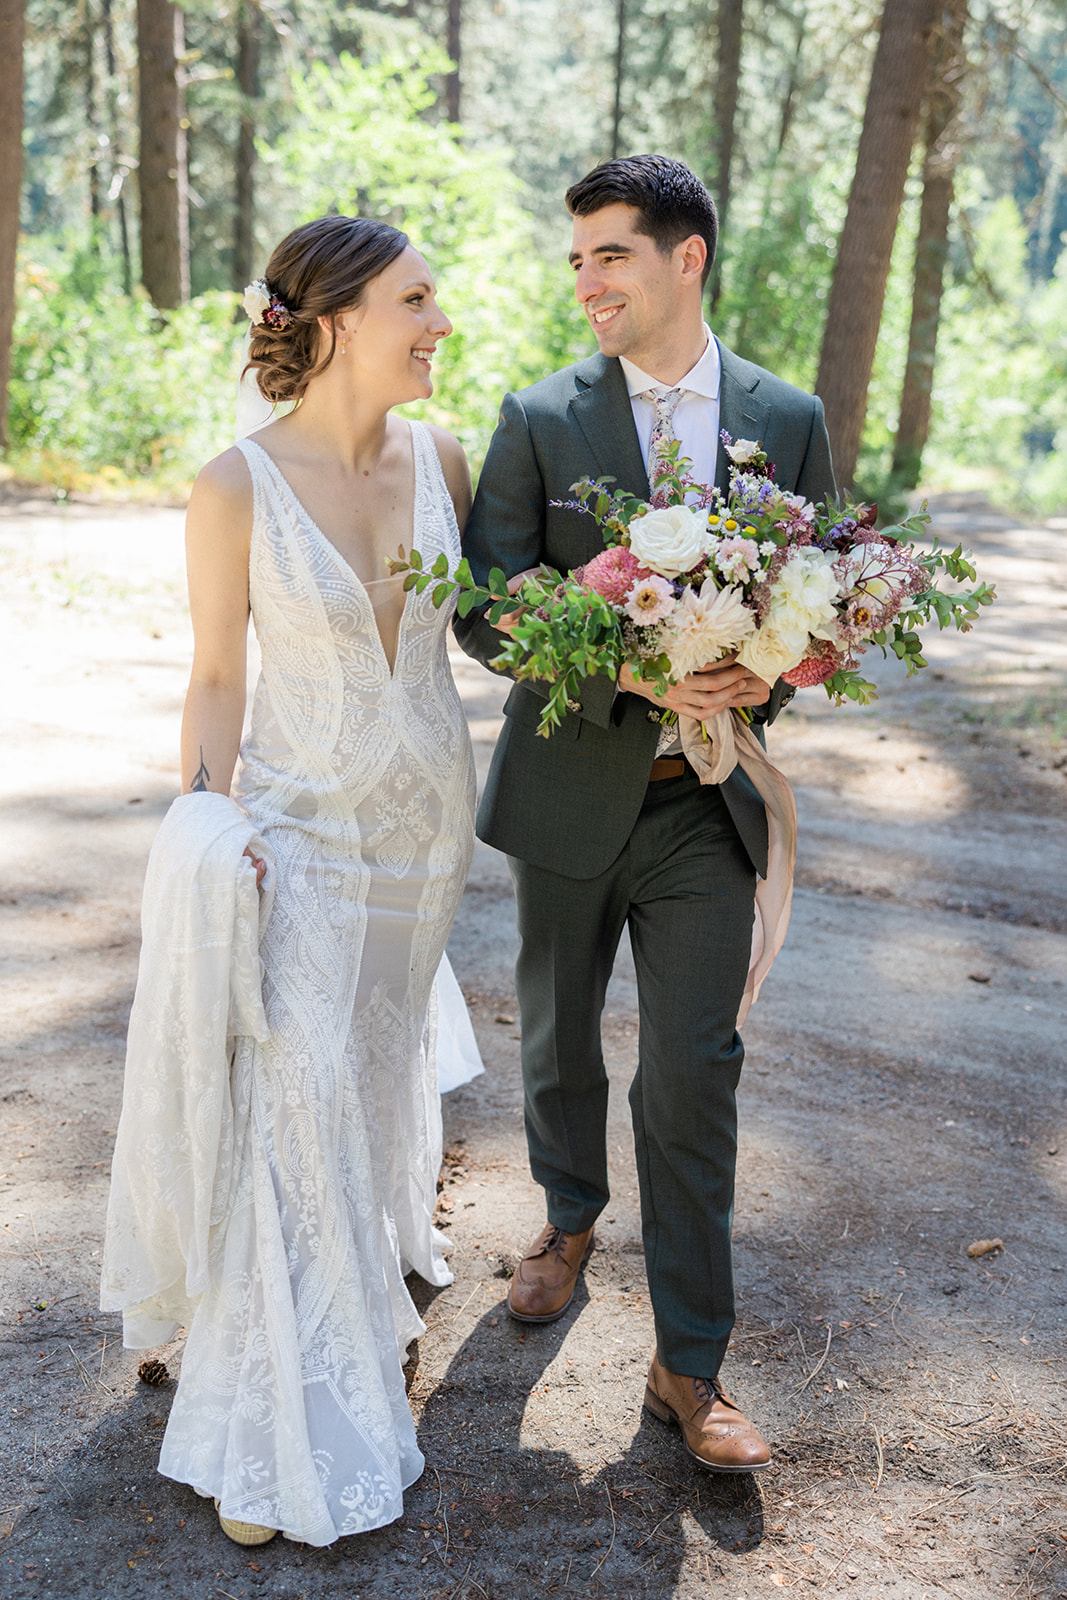 The bride and groom walk through the forest together, holding a bridal bouquet